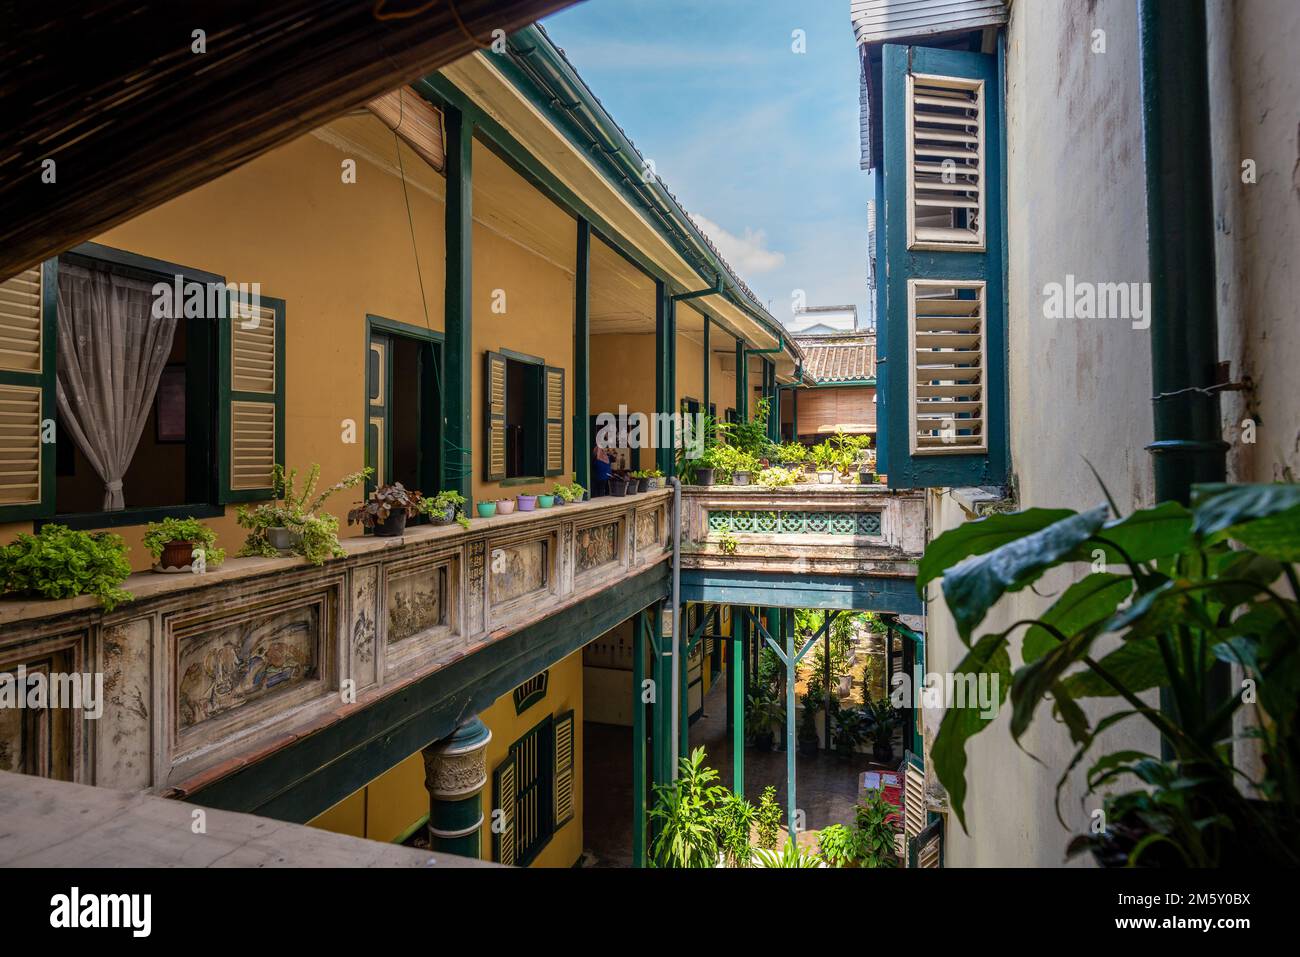 Medan, Indonesia - July 21, 2022: The balcony of an heritage house. Taken on an overcast day with no people. Stock Photo